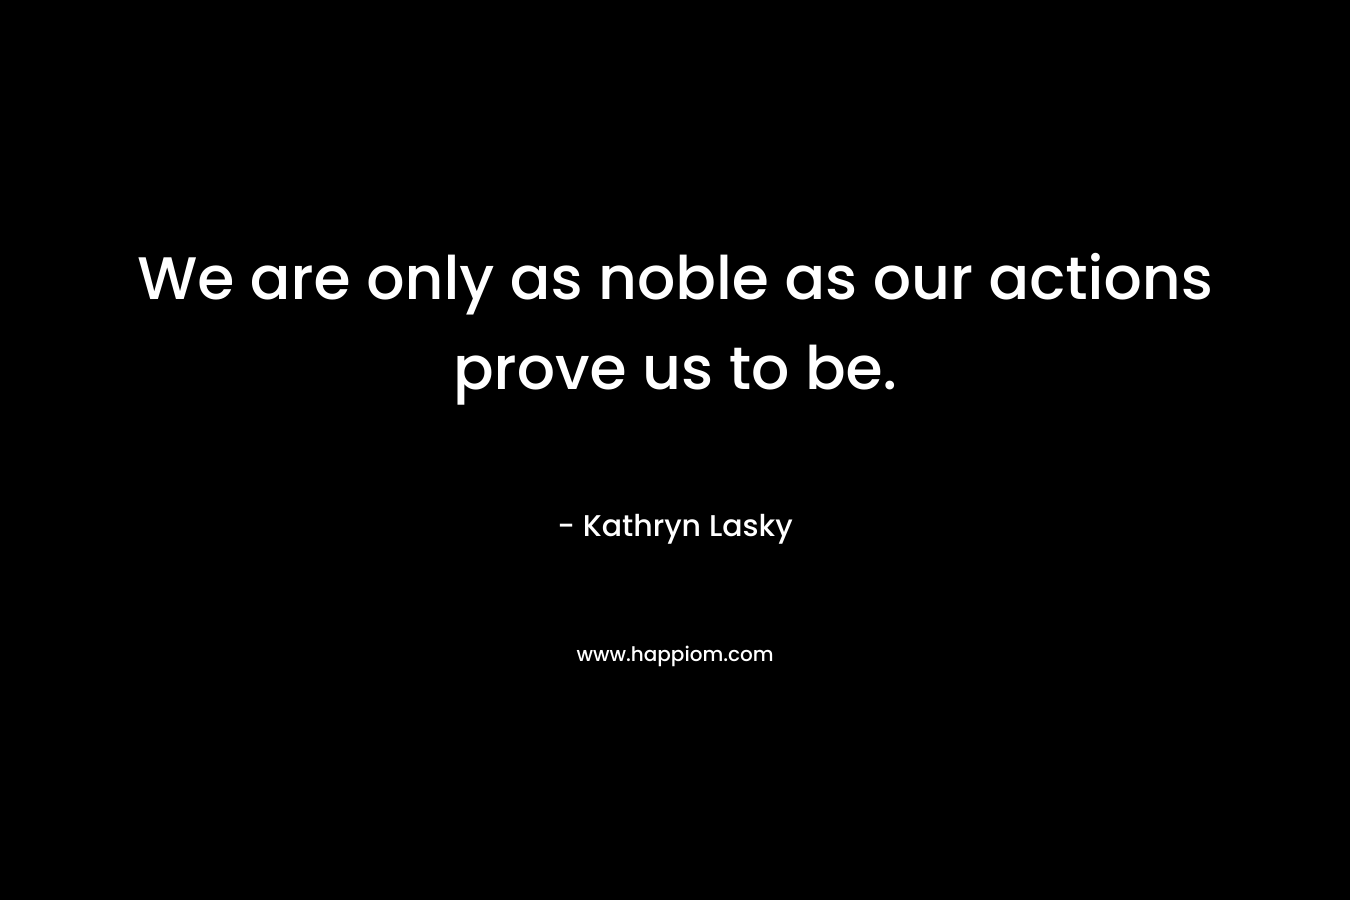 We are only as noble as our actions prove us to be. – Kathryn Lasky